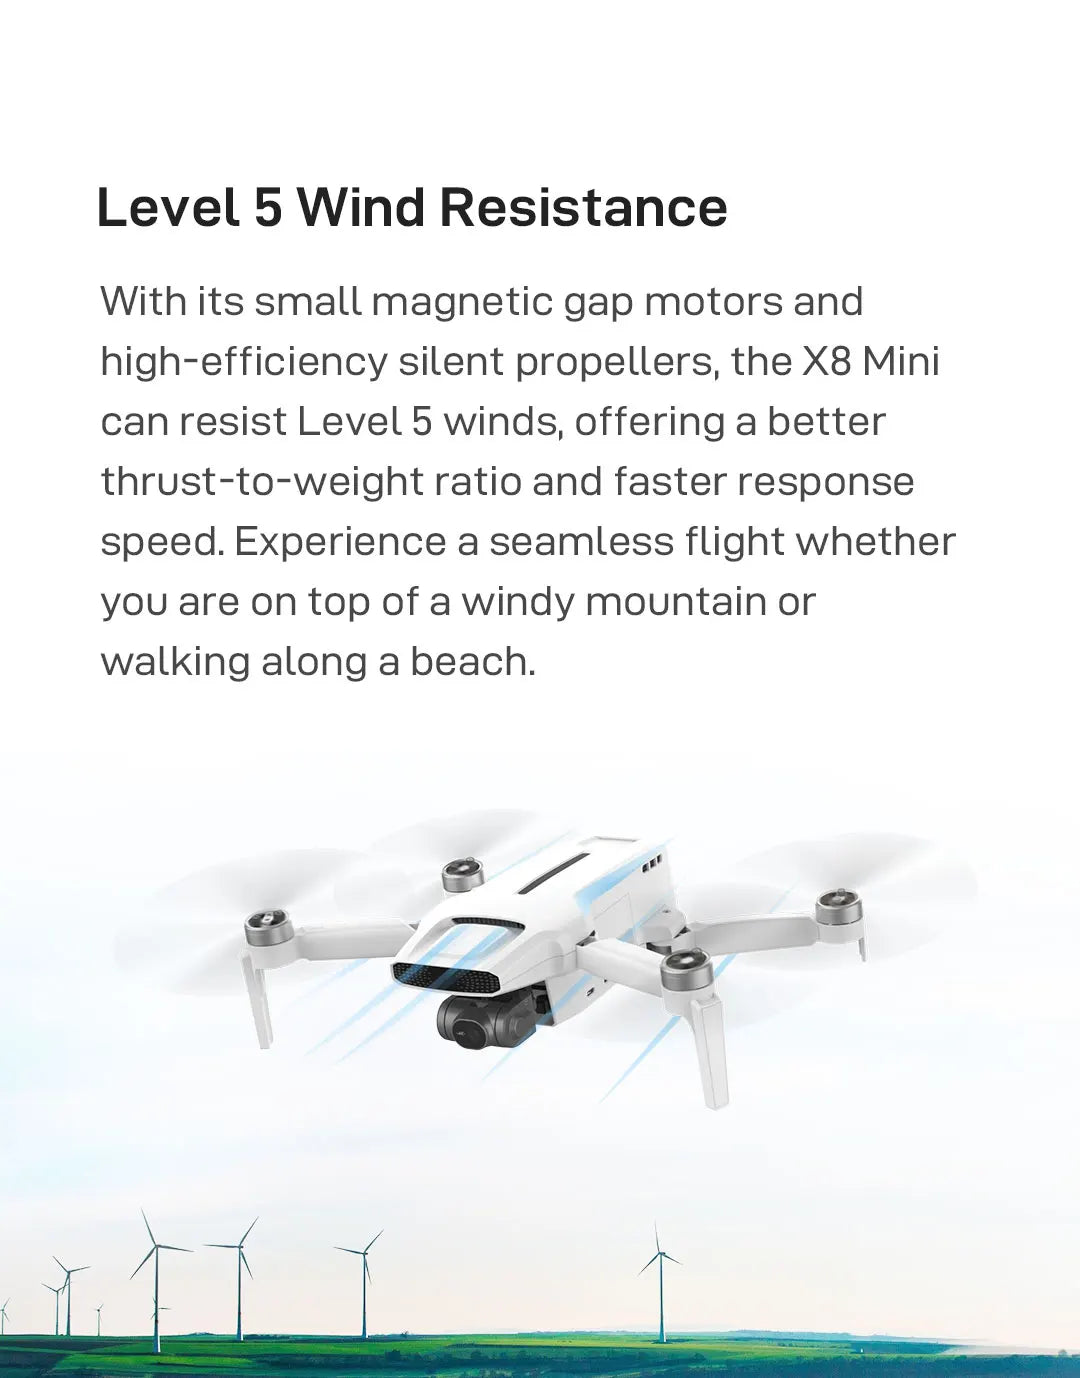 FIMI x8 Mini Drone, the X8 Mini can resist Level 5 winds; offering a better thrust-to-